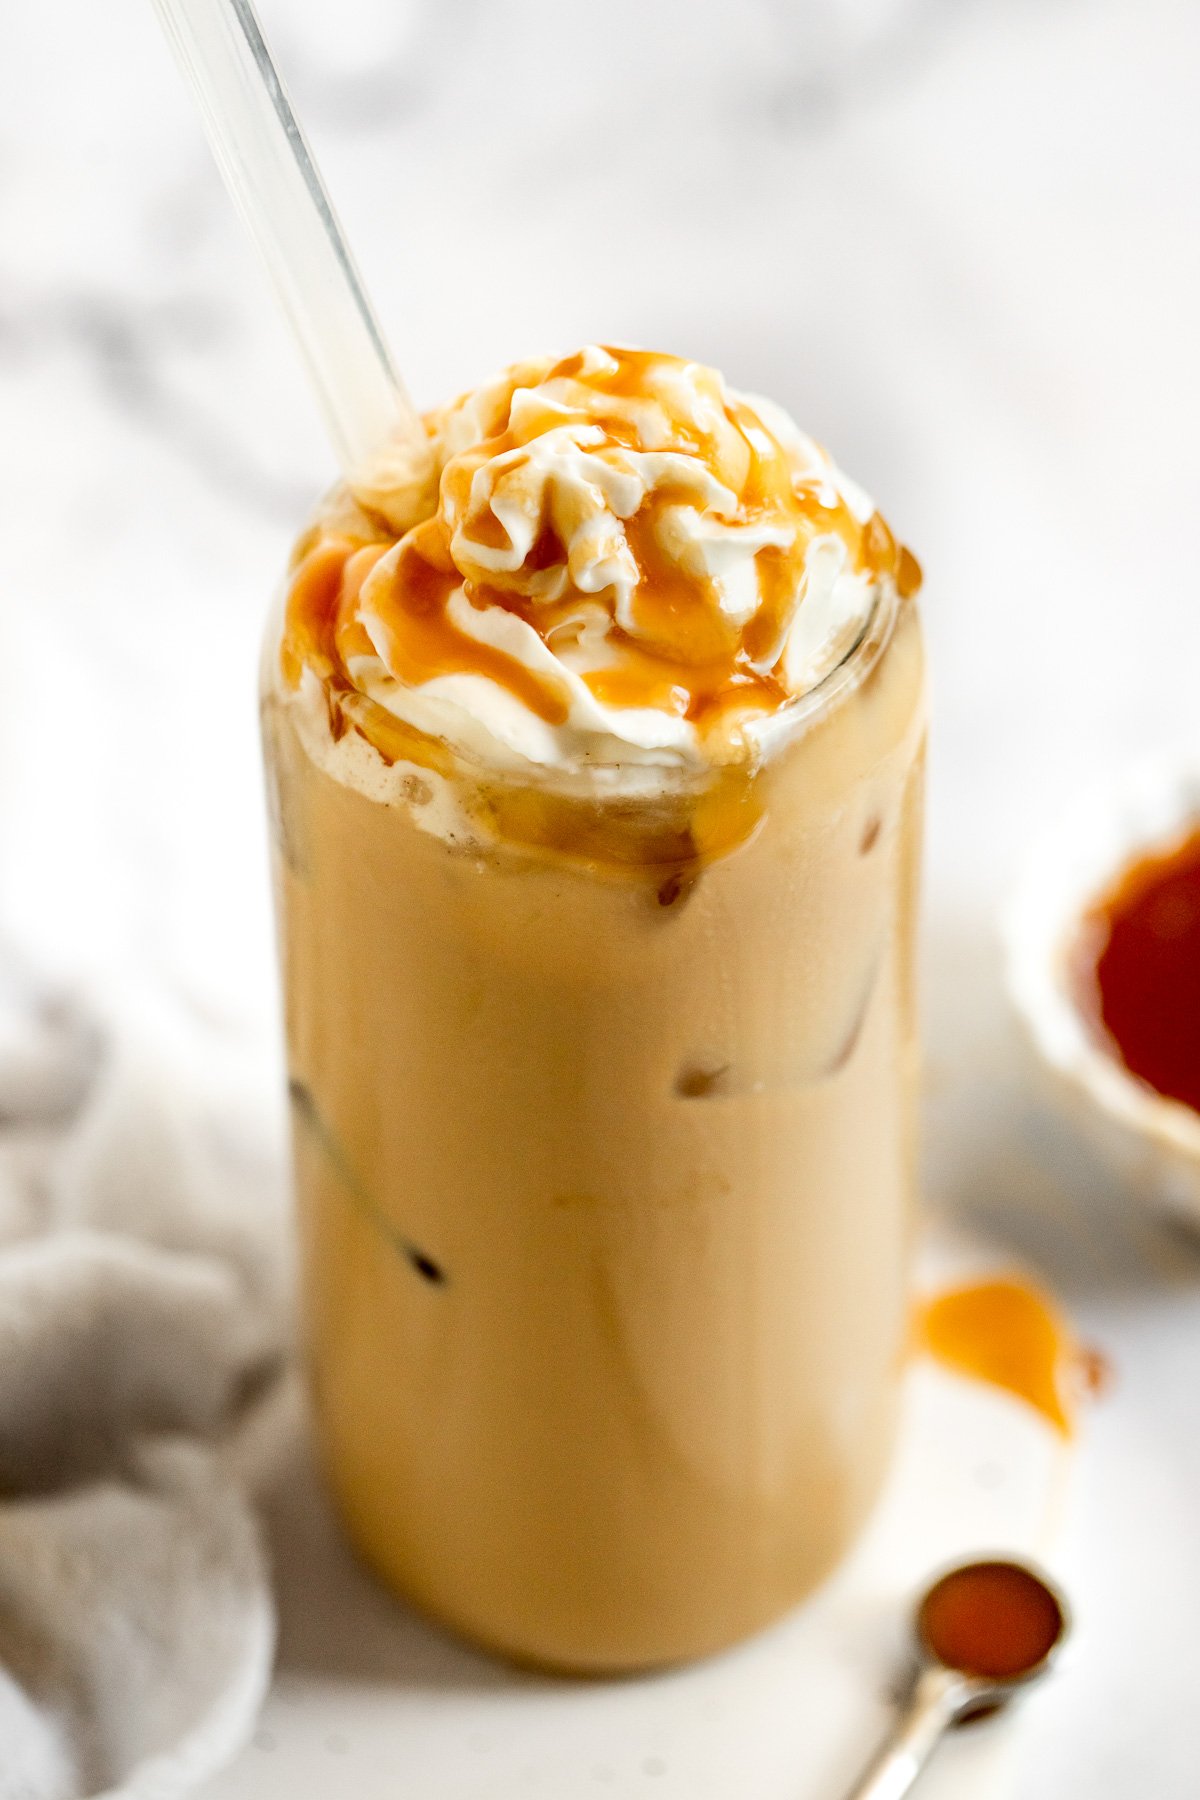 How To Make An Iced Caramel Latte